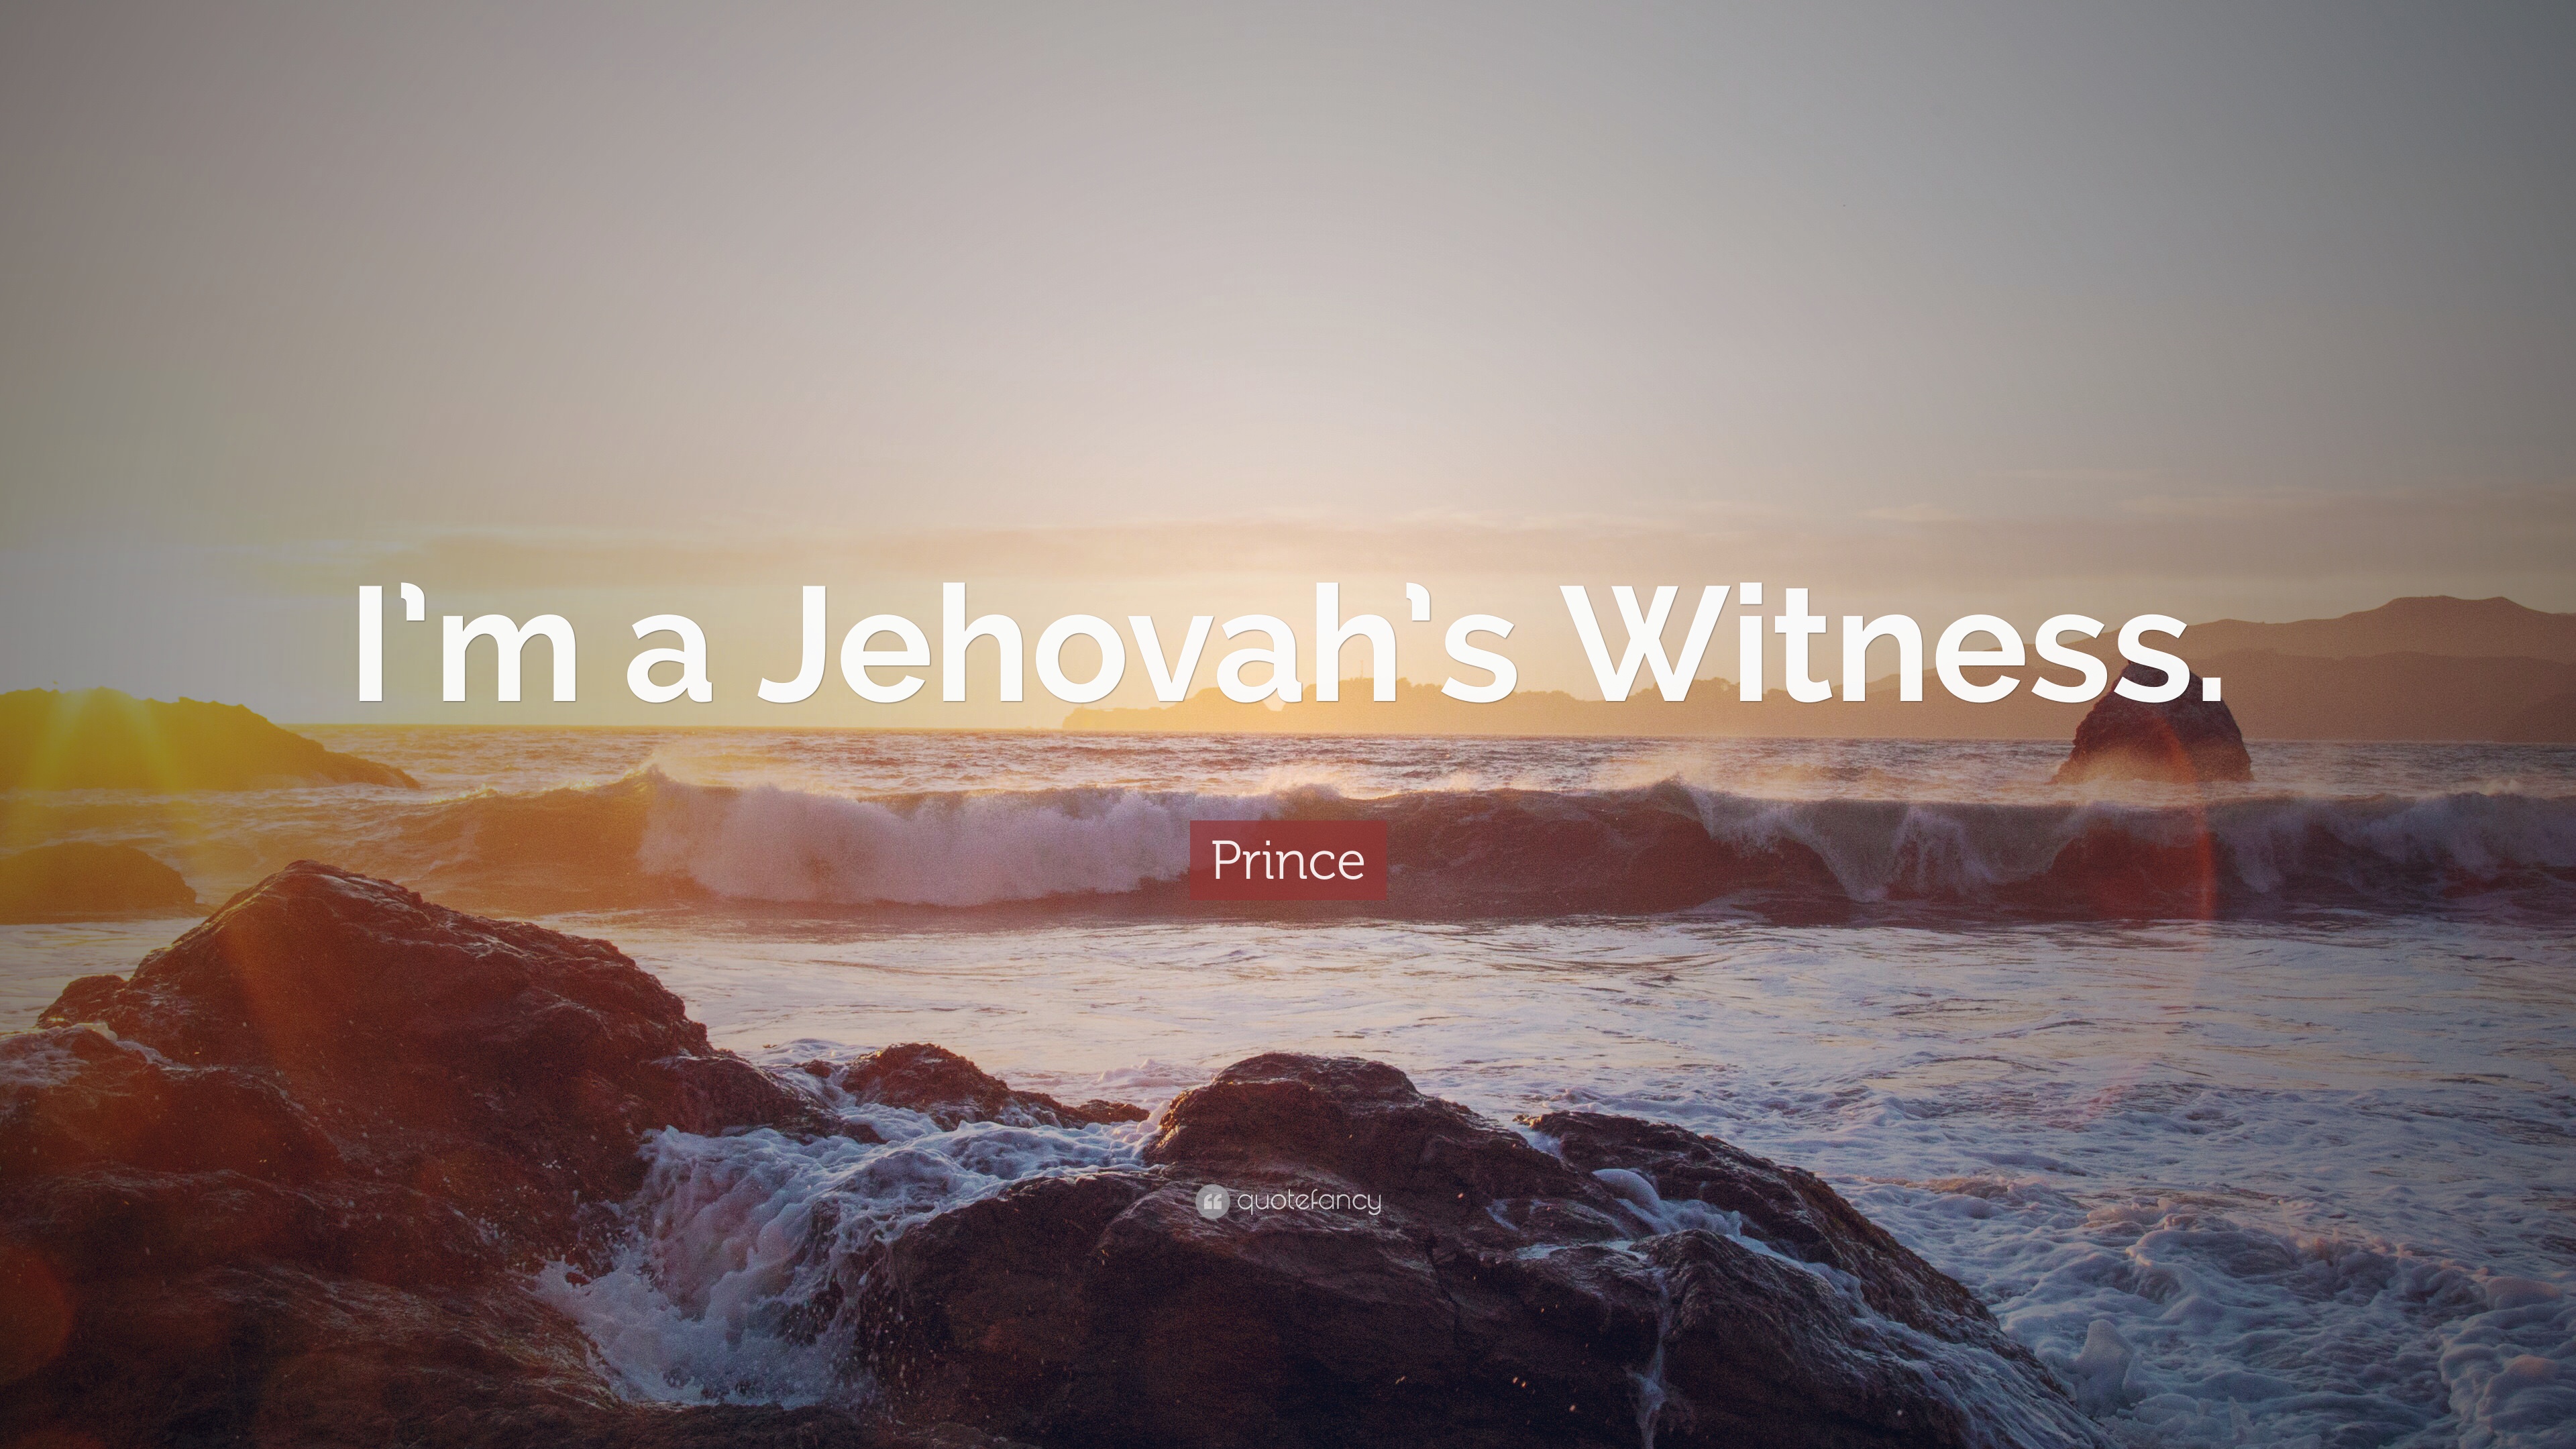 Prince Quote: “I'm a Jehovah's Witness.” 12 wallpaper